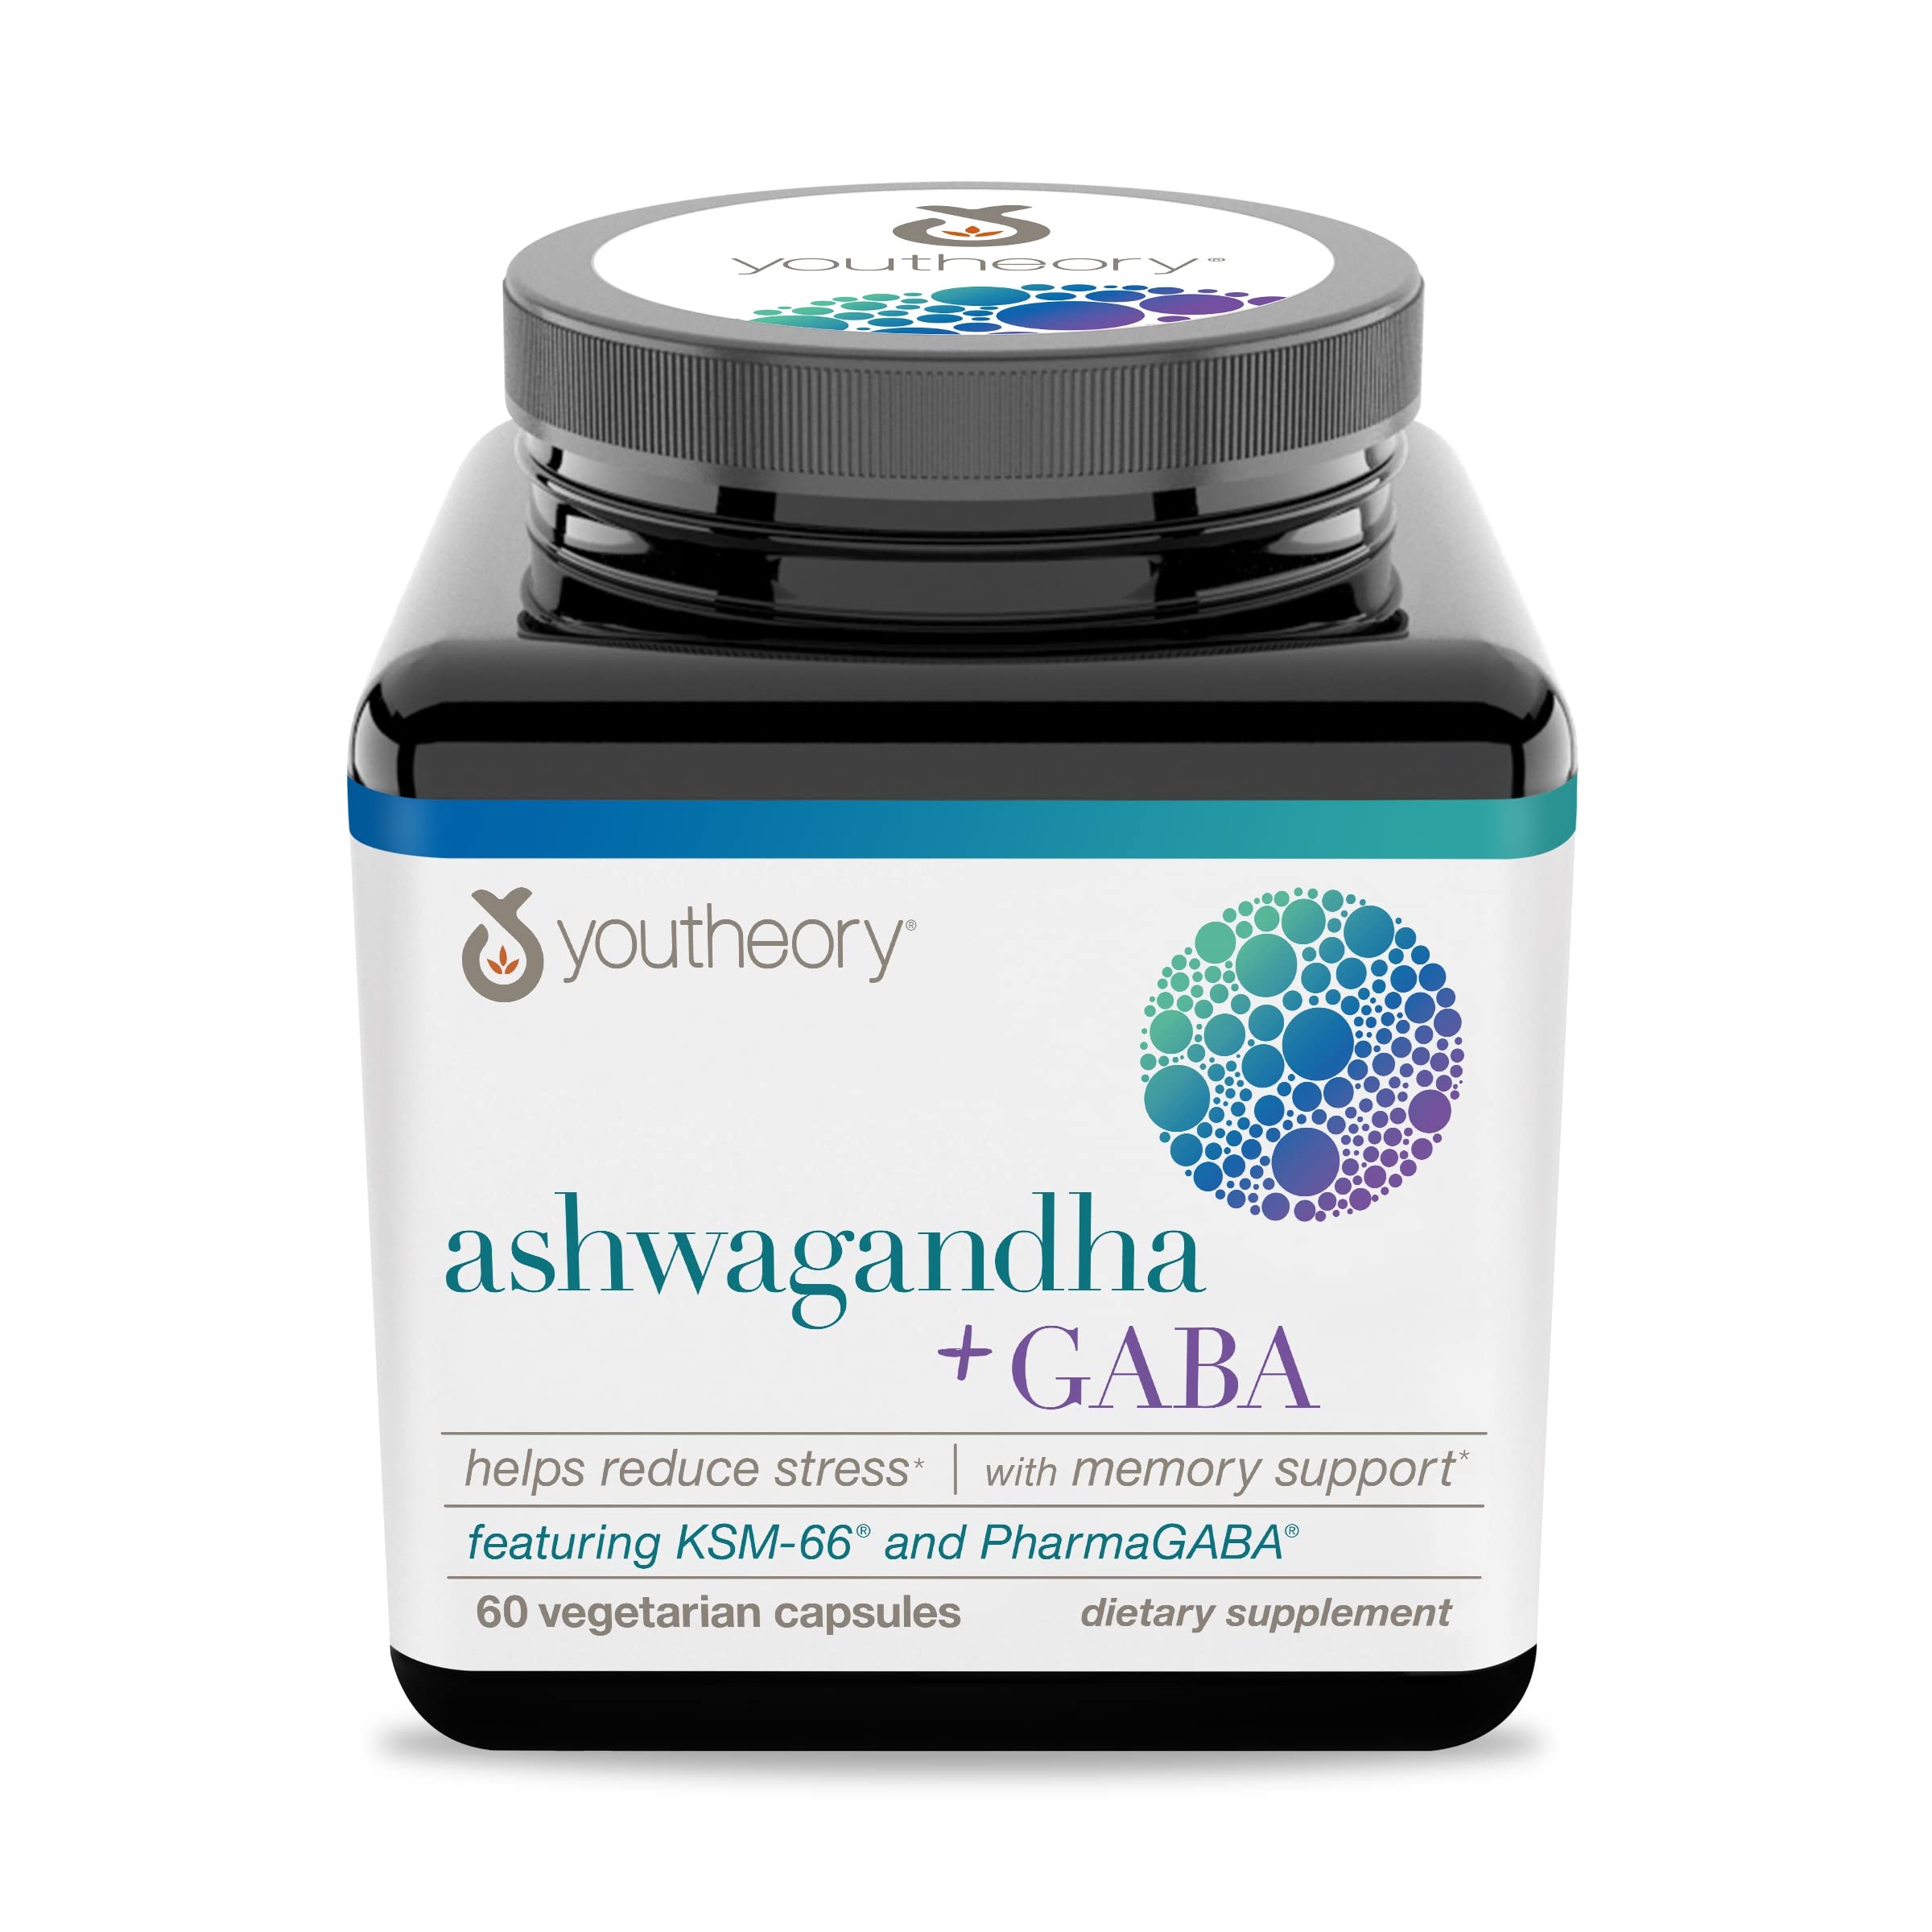 Youtheory Ashwagandha+GABA, Helps Reduce Stress with Memory Support, 60 Vegetarian Capsules